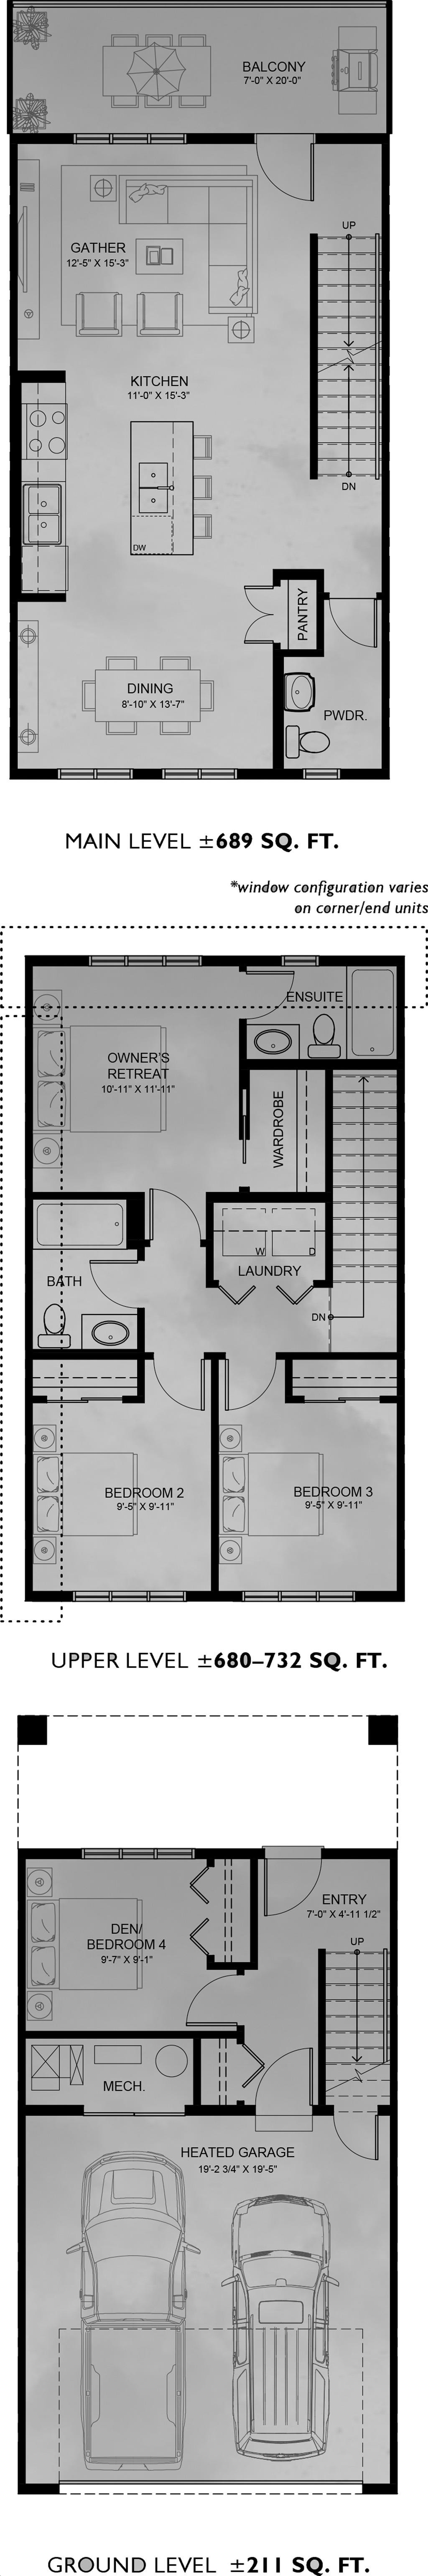  Floor Plan of Briarfield Towns with undefined beds